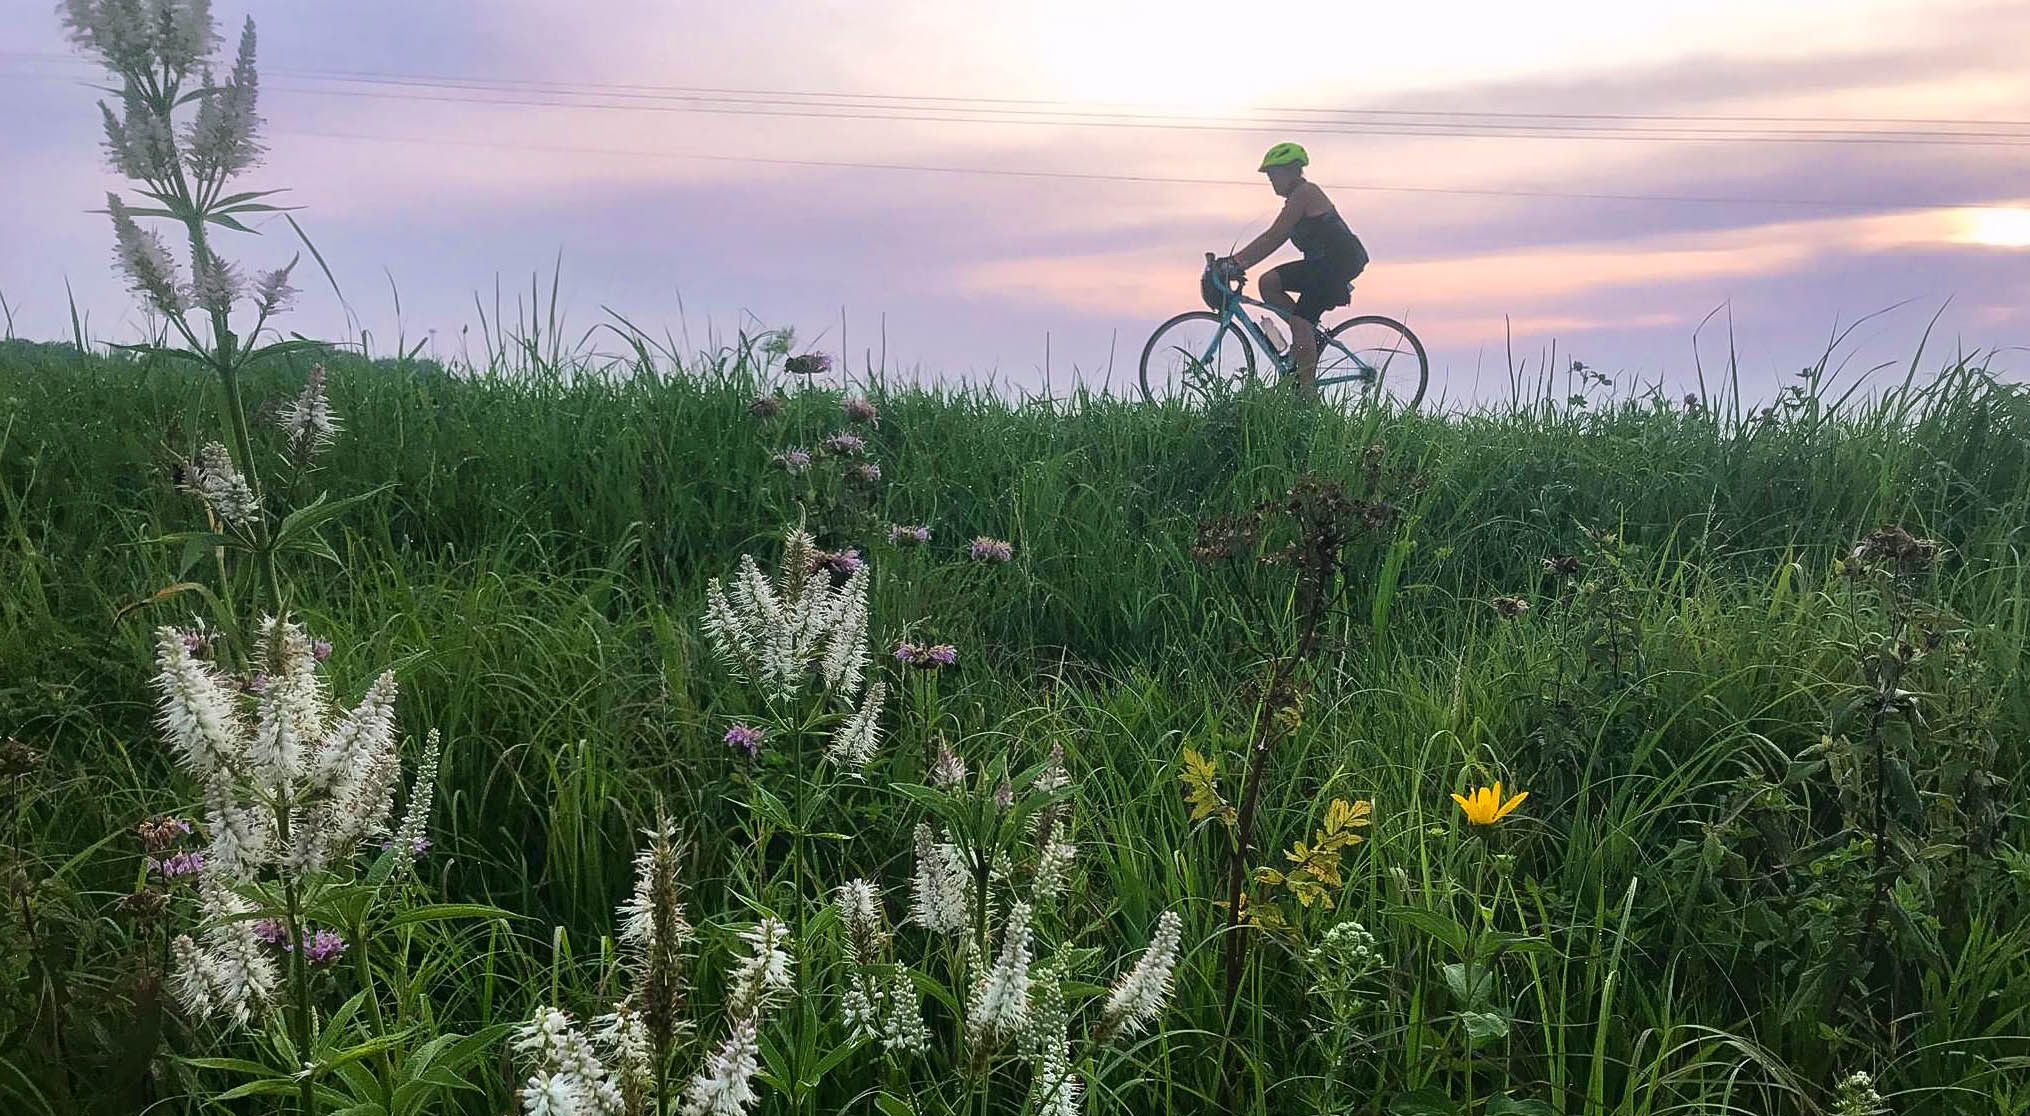 A cyclist bikes at sunset on a road next to native roadside vegetation.